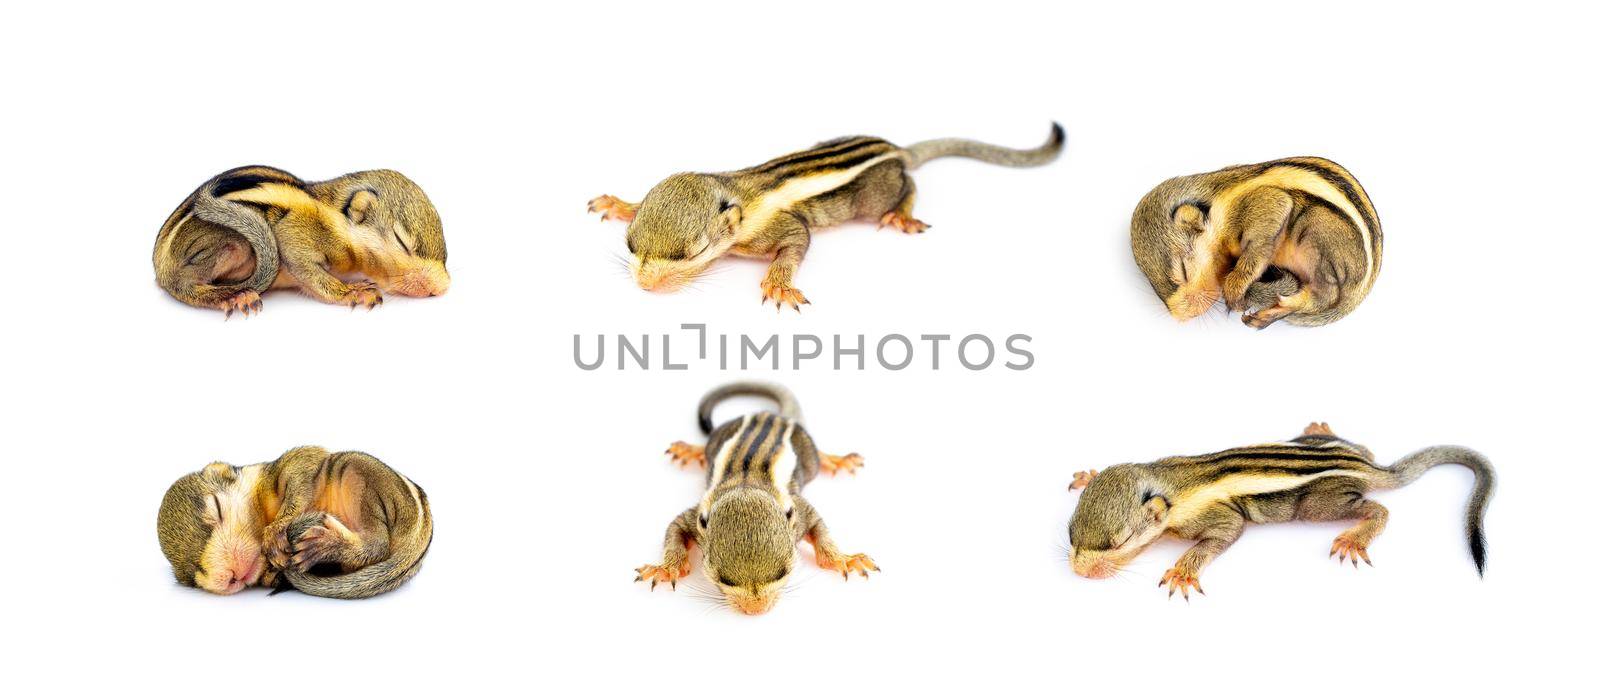 Group of baby himalayan striped squirrel or Baby burmese striped squirrel (Tamiops mcclellandii) on white background. Wild Animals. by yod67